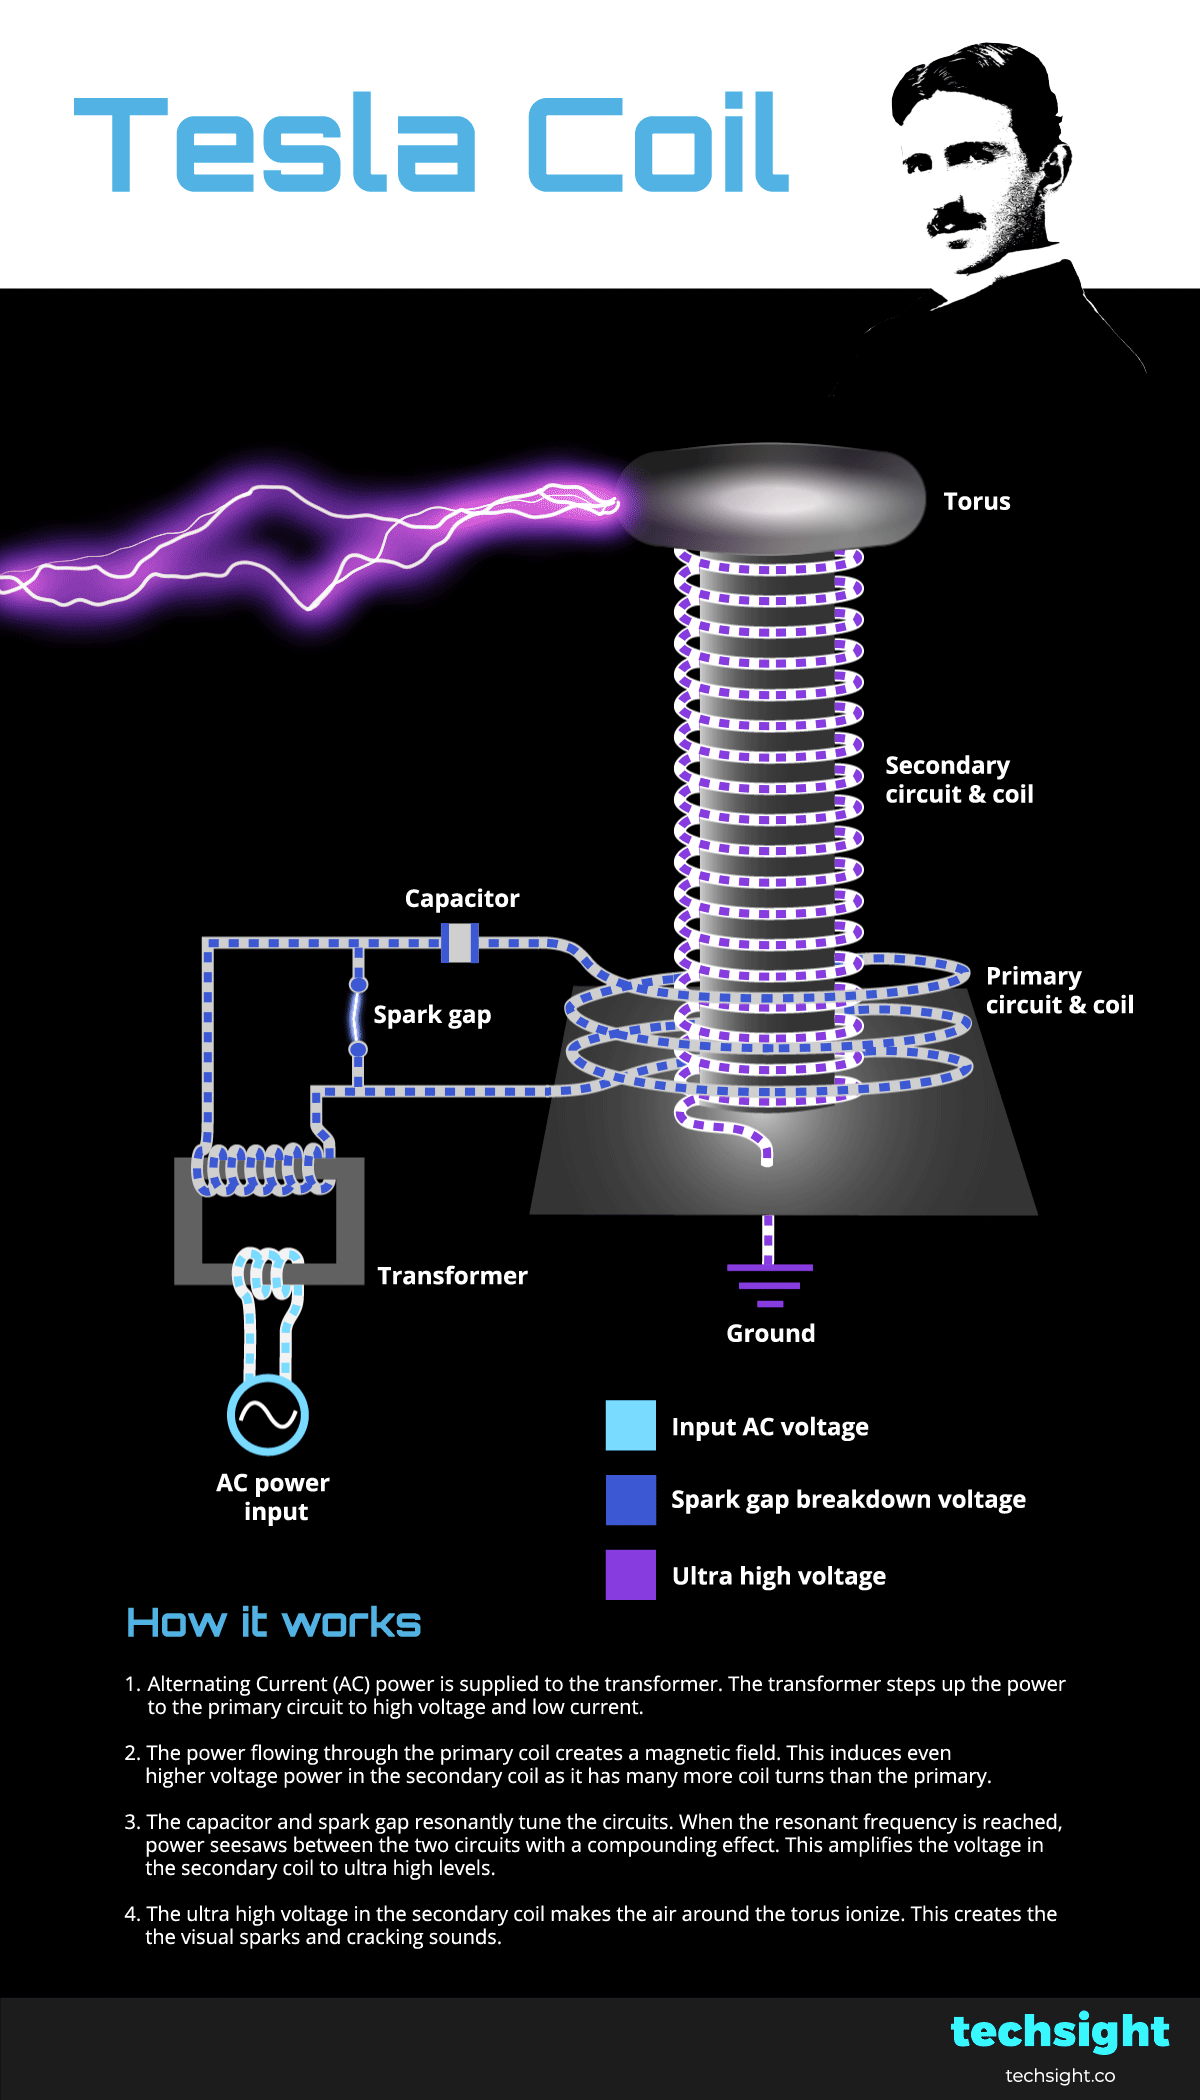 https://techsight.co/wp-content/uploads/2023/07/Tesla-Coil-Animated-Schematic.gif